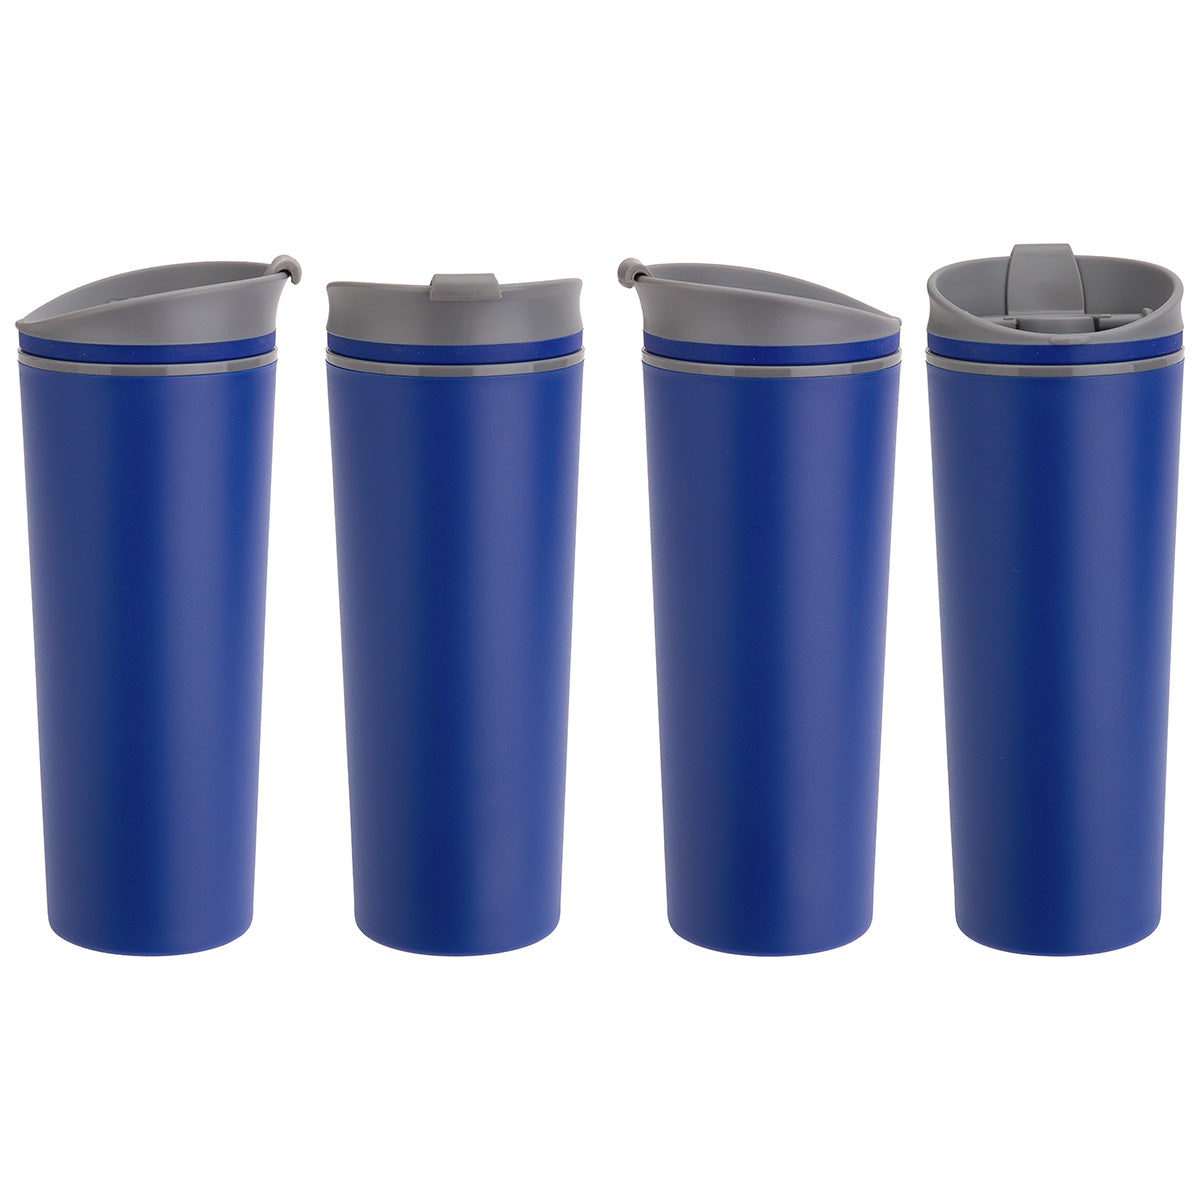 Commuter 17 oz Double-wall Polypropylene Tumbler with Flip Top Closure